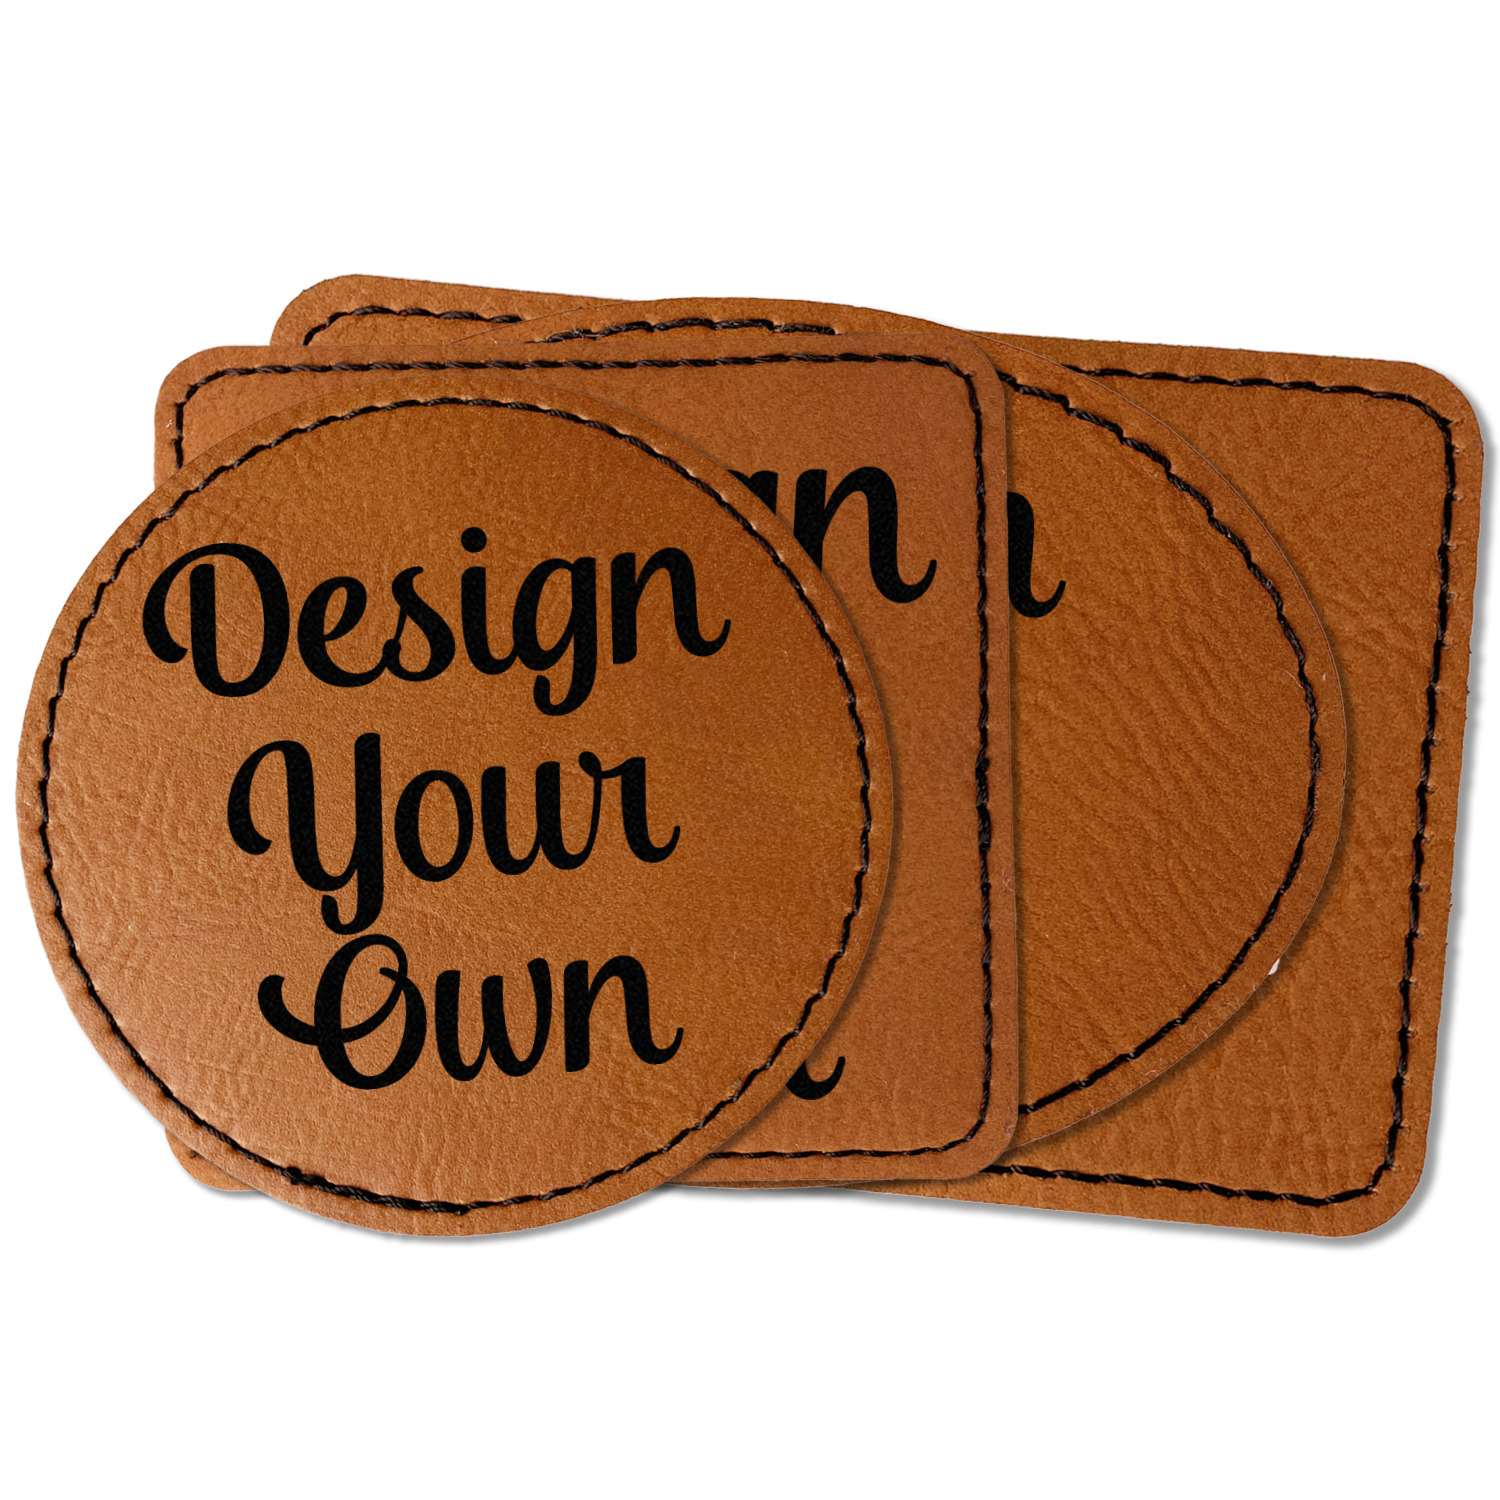 https://www.youcustomizeit.com/common/MAKE/965833/Design-Your-Own-Leatherette-Patches-MAIN-PARENT.jpg?lm=1615570696